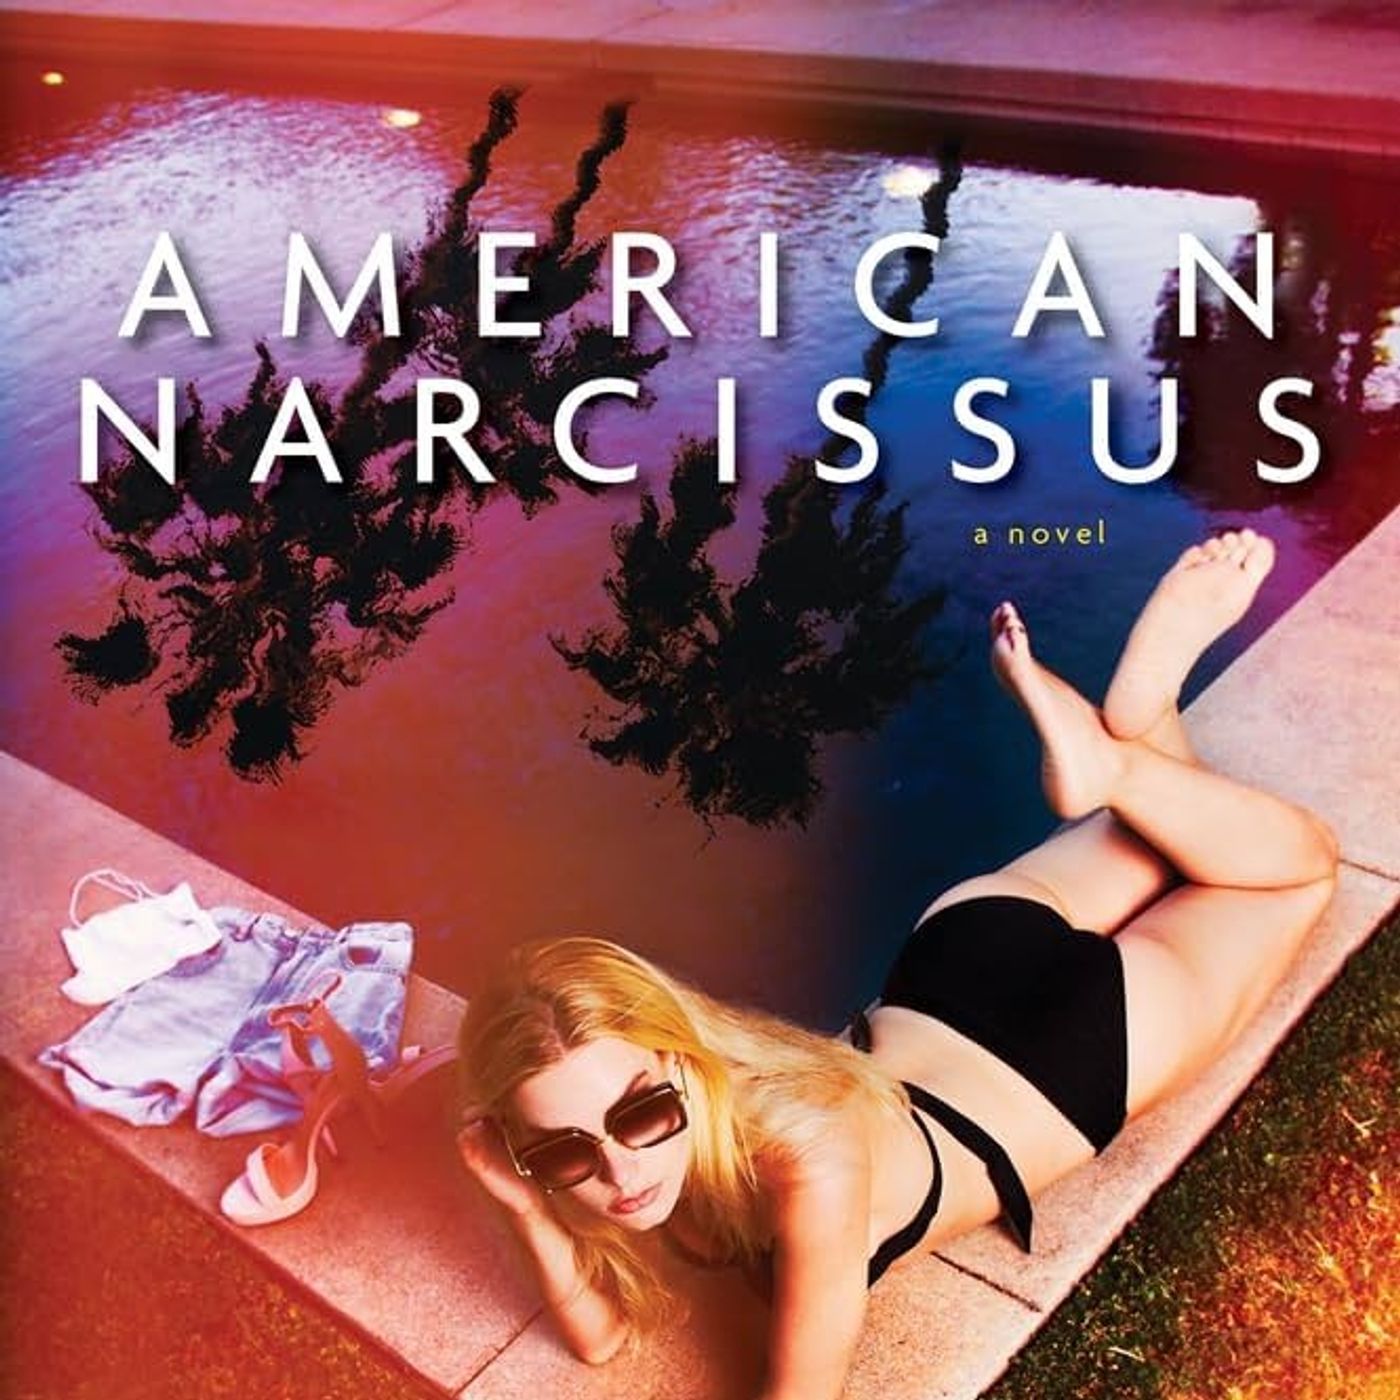 Castle Talk:  Chandler Morrison, author of American Narcissus